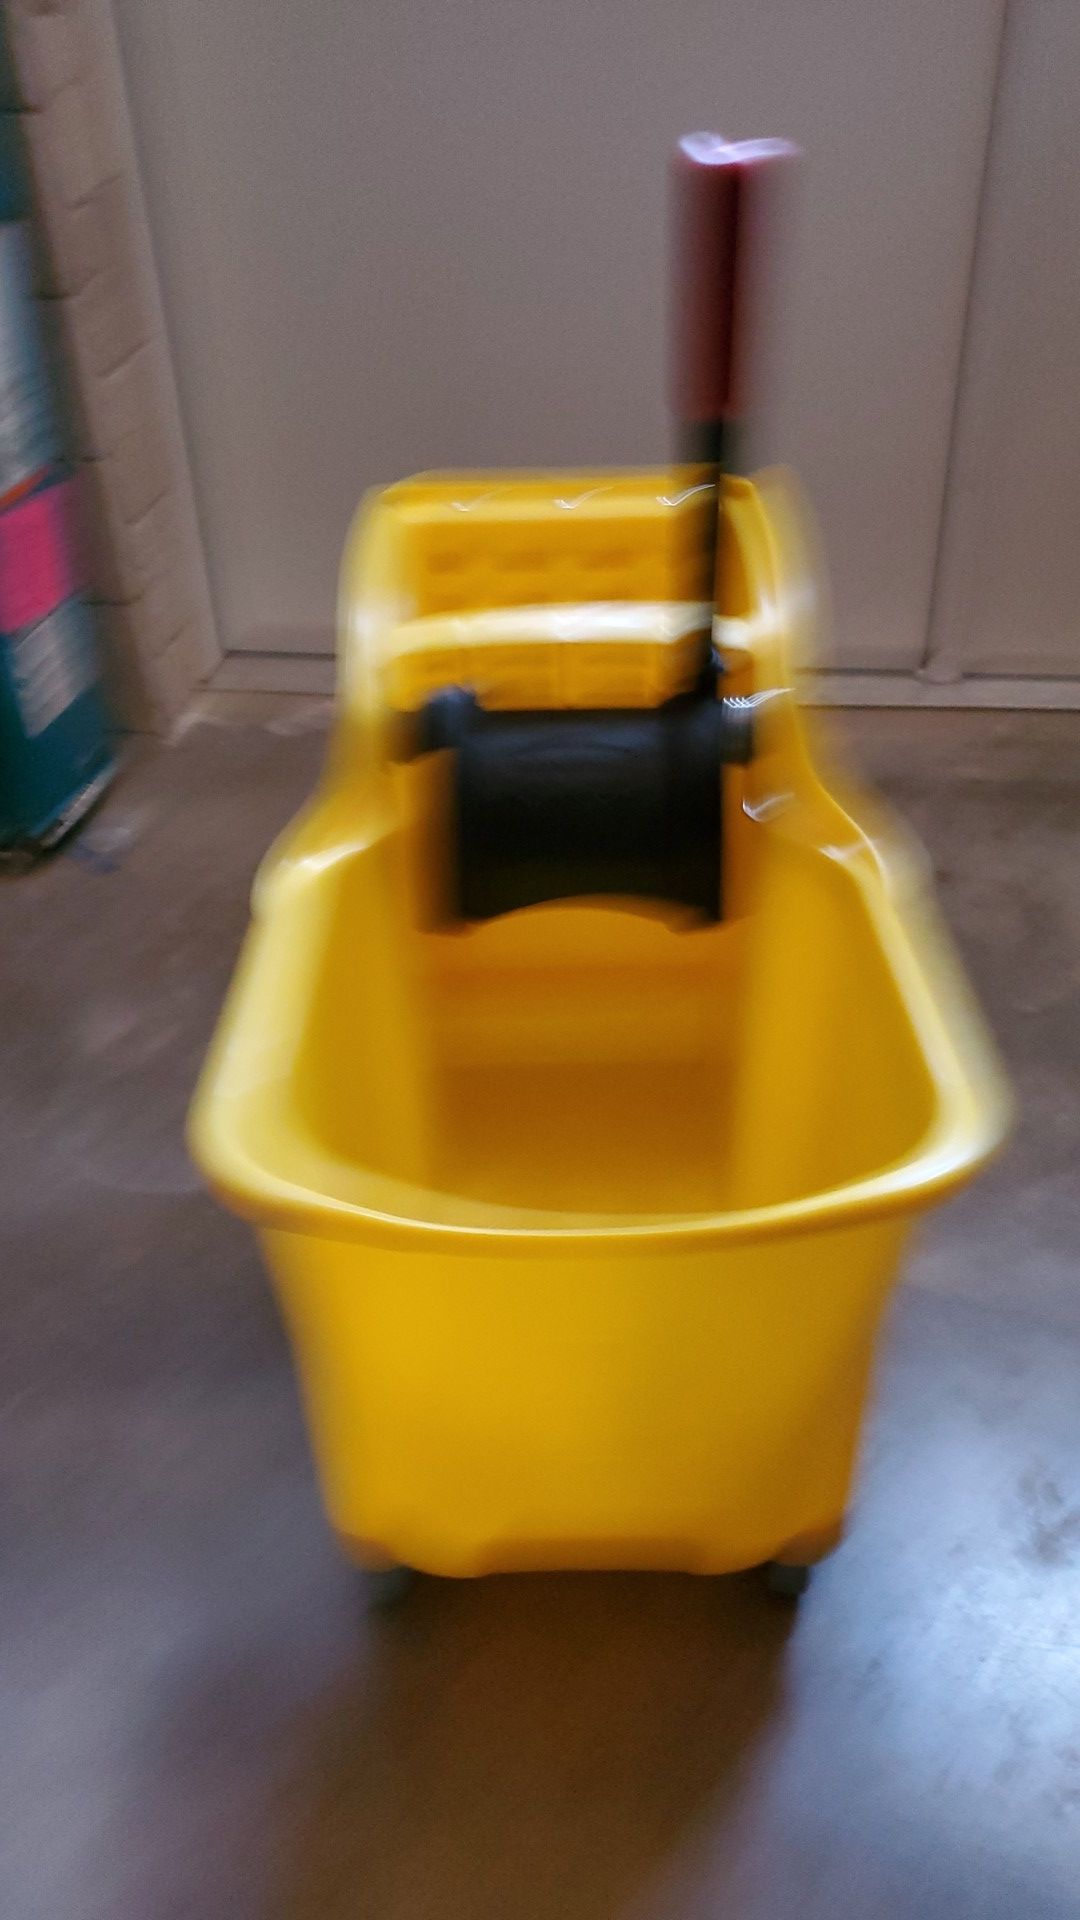 BRAND NEW MOP BUCKET 50 WITH THE SON OF GOD OR 110 AT HOME DEPOT